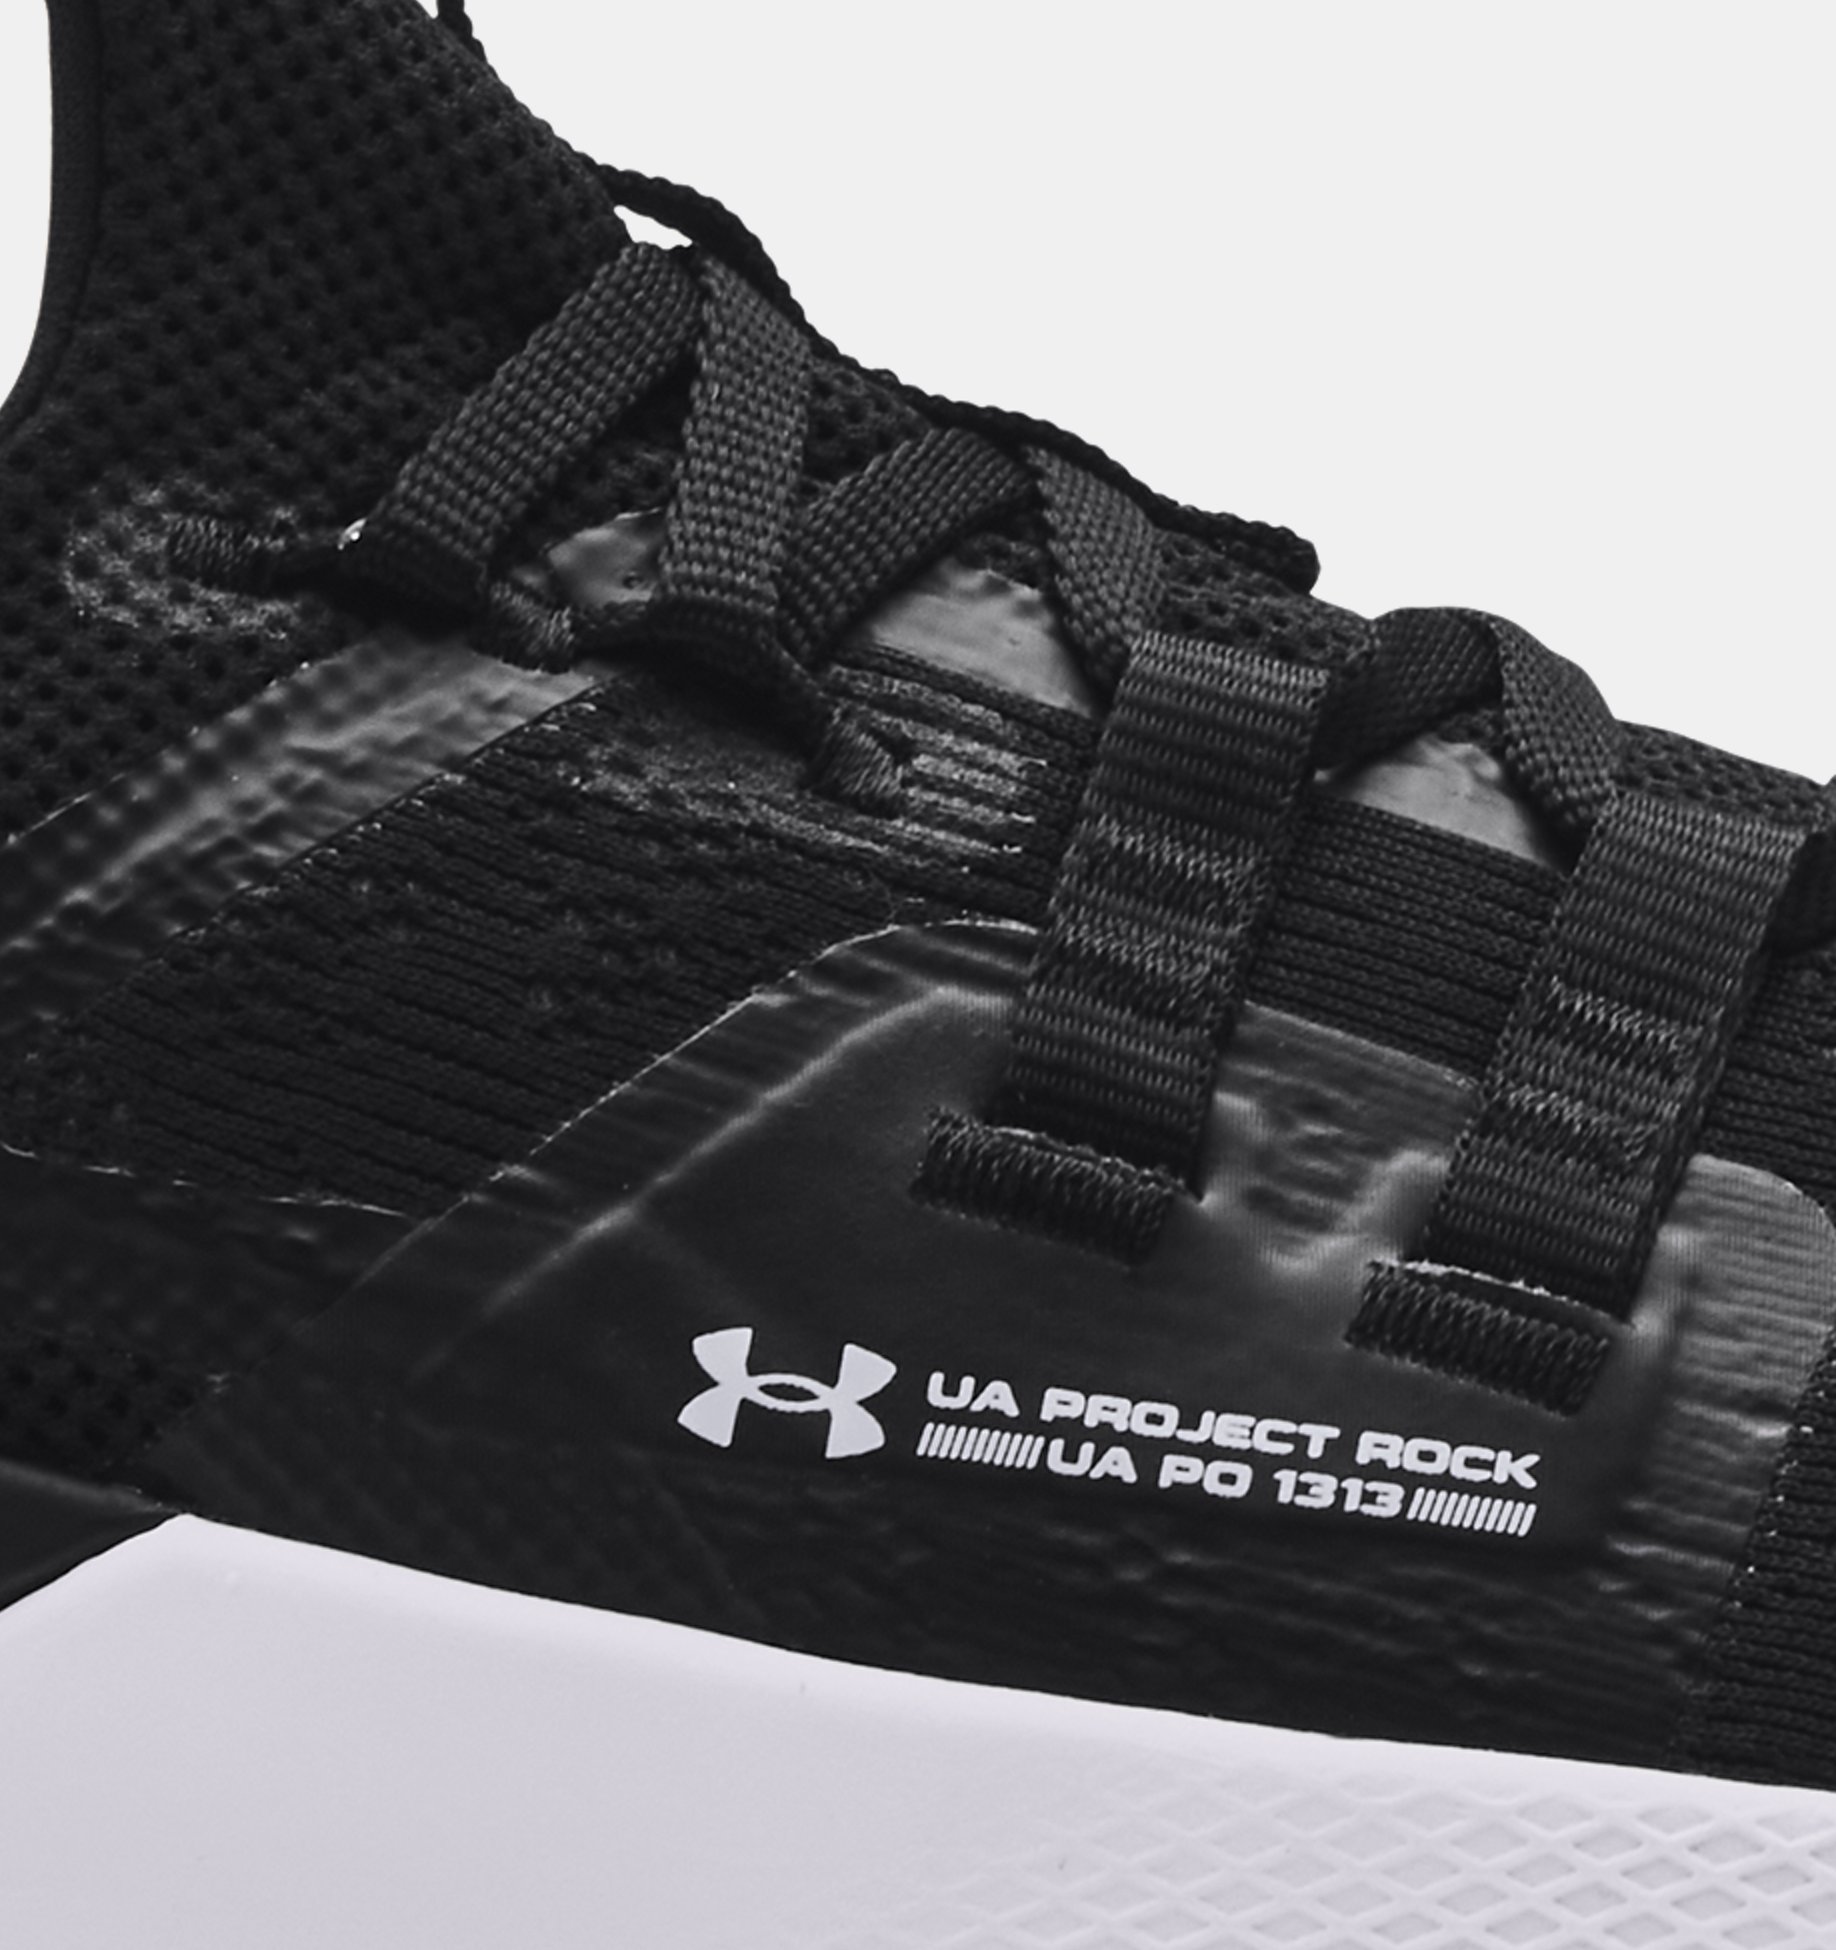 Tennis Under Armour Hombre Charged Project Rock BSR 3